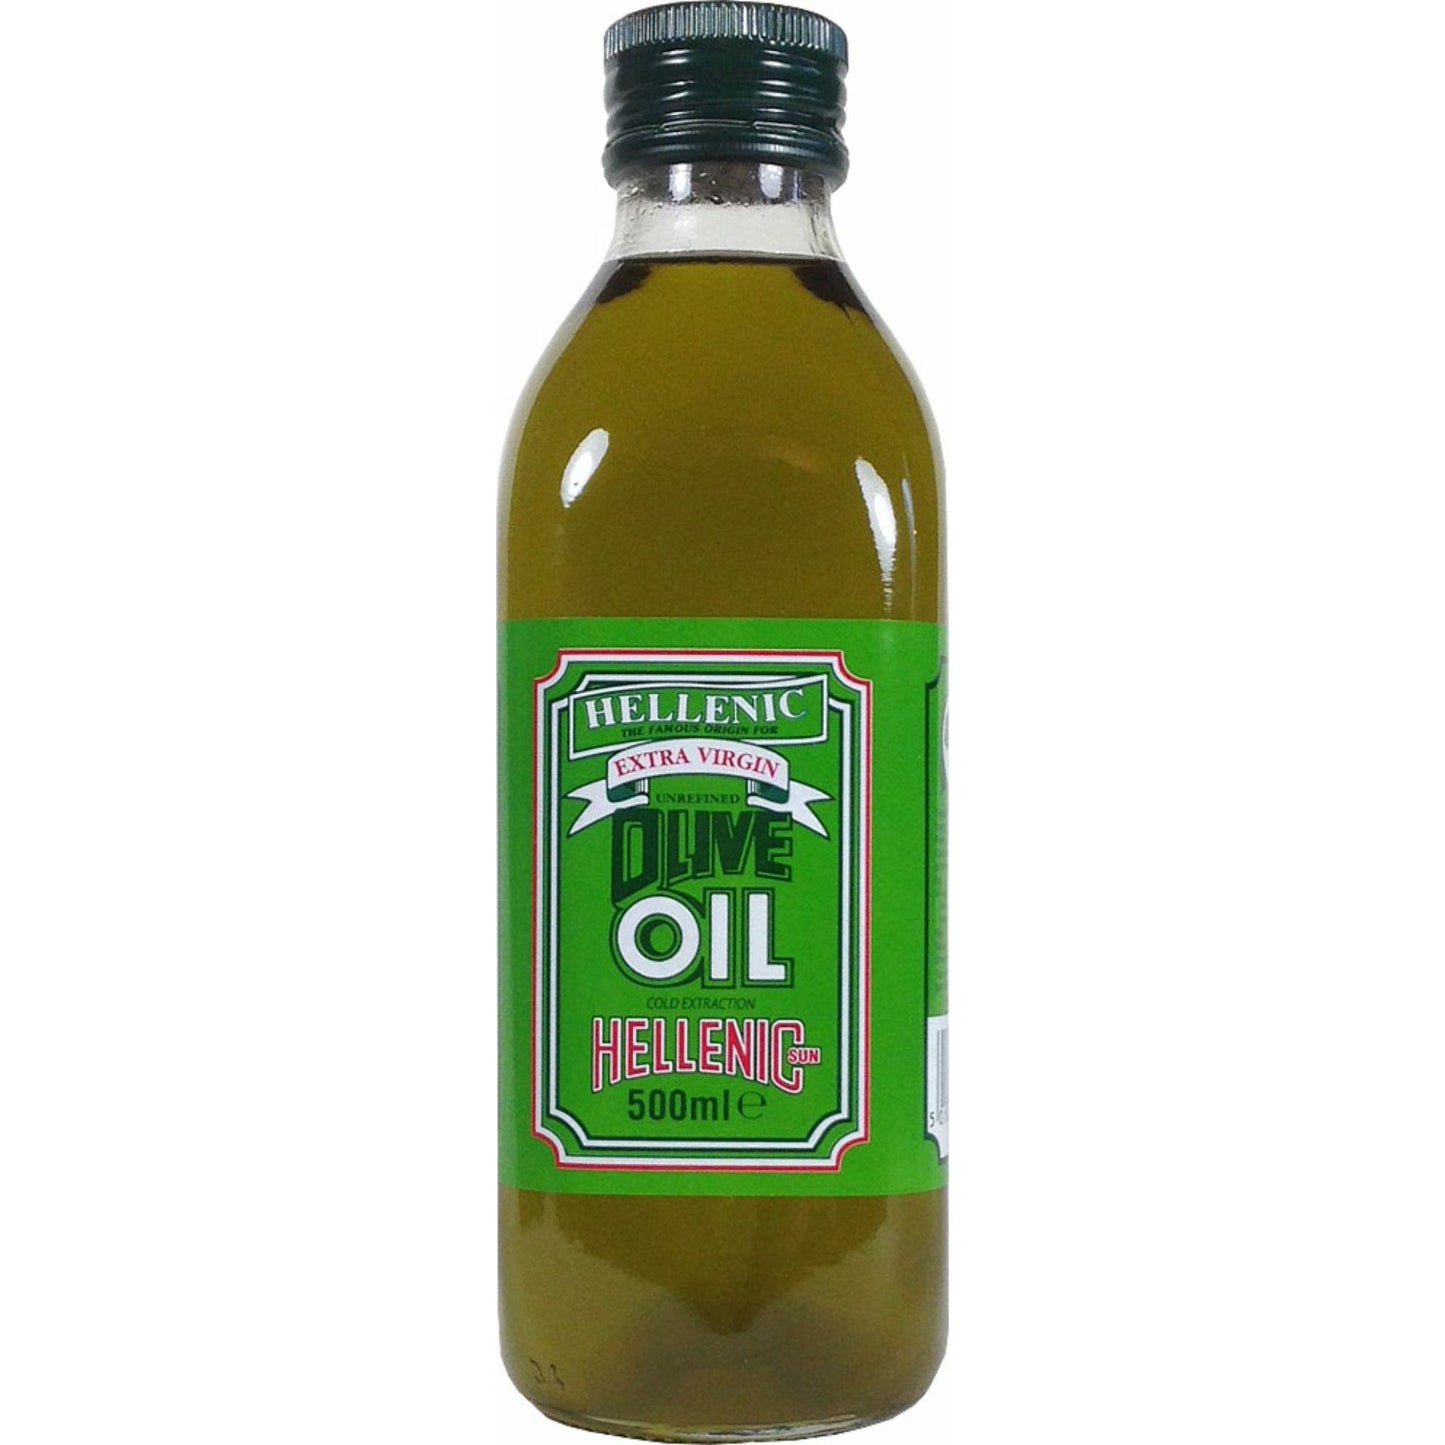 HELLENIC Extra Virgin Olive Oil             Size - 12x500ml